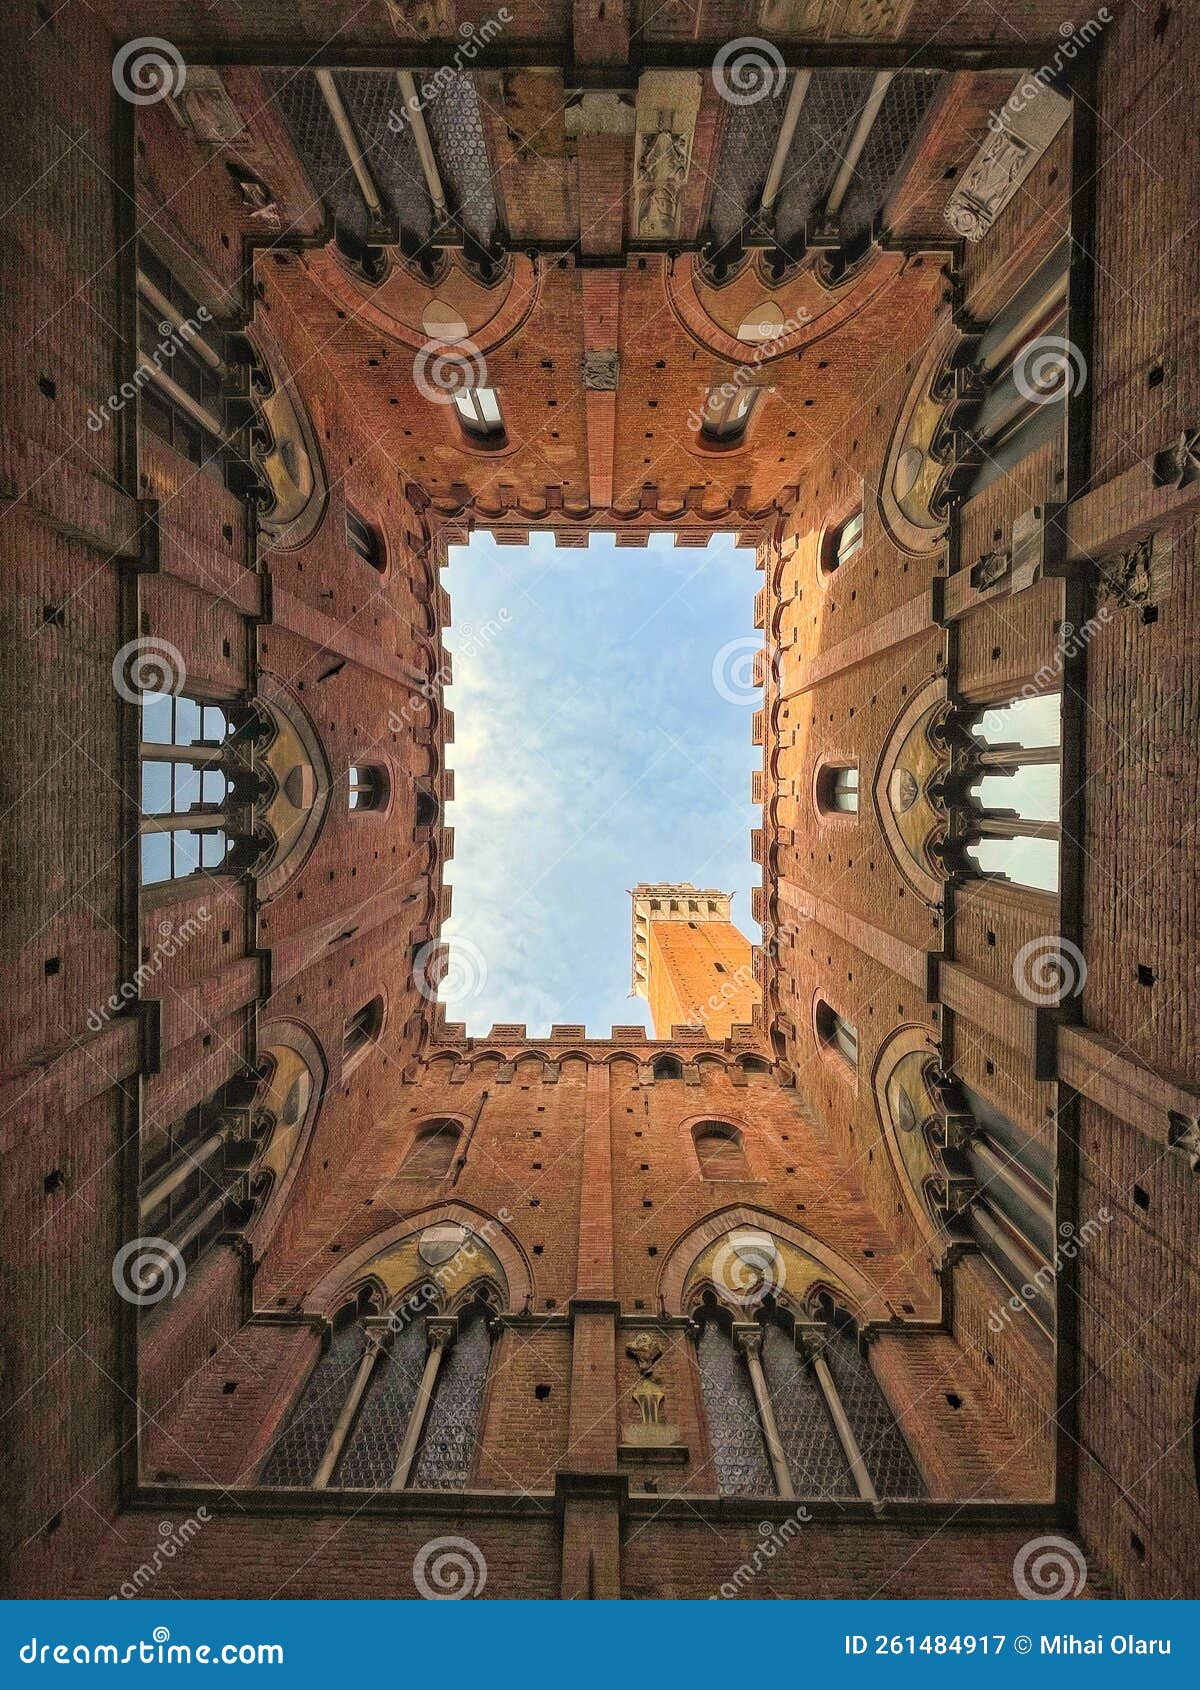 the sky view from museo civico in siena